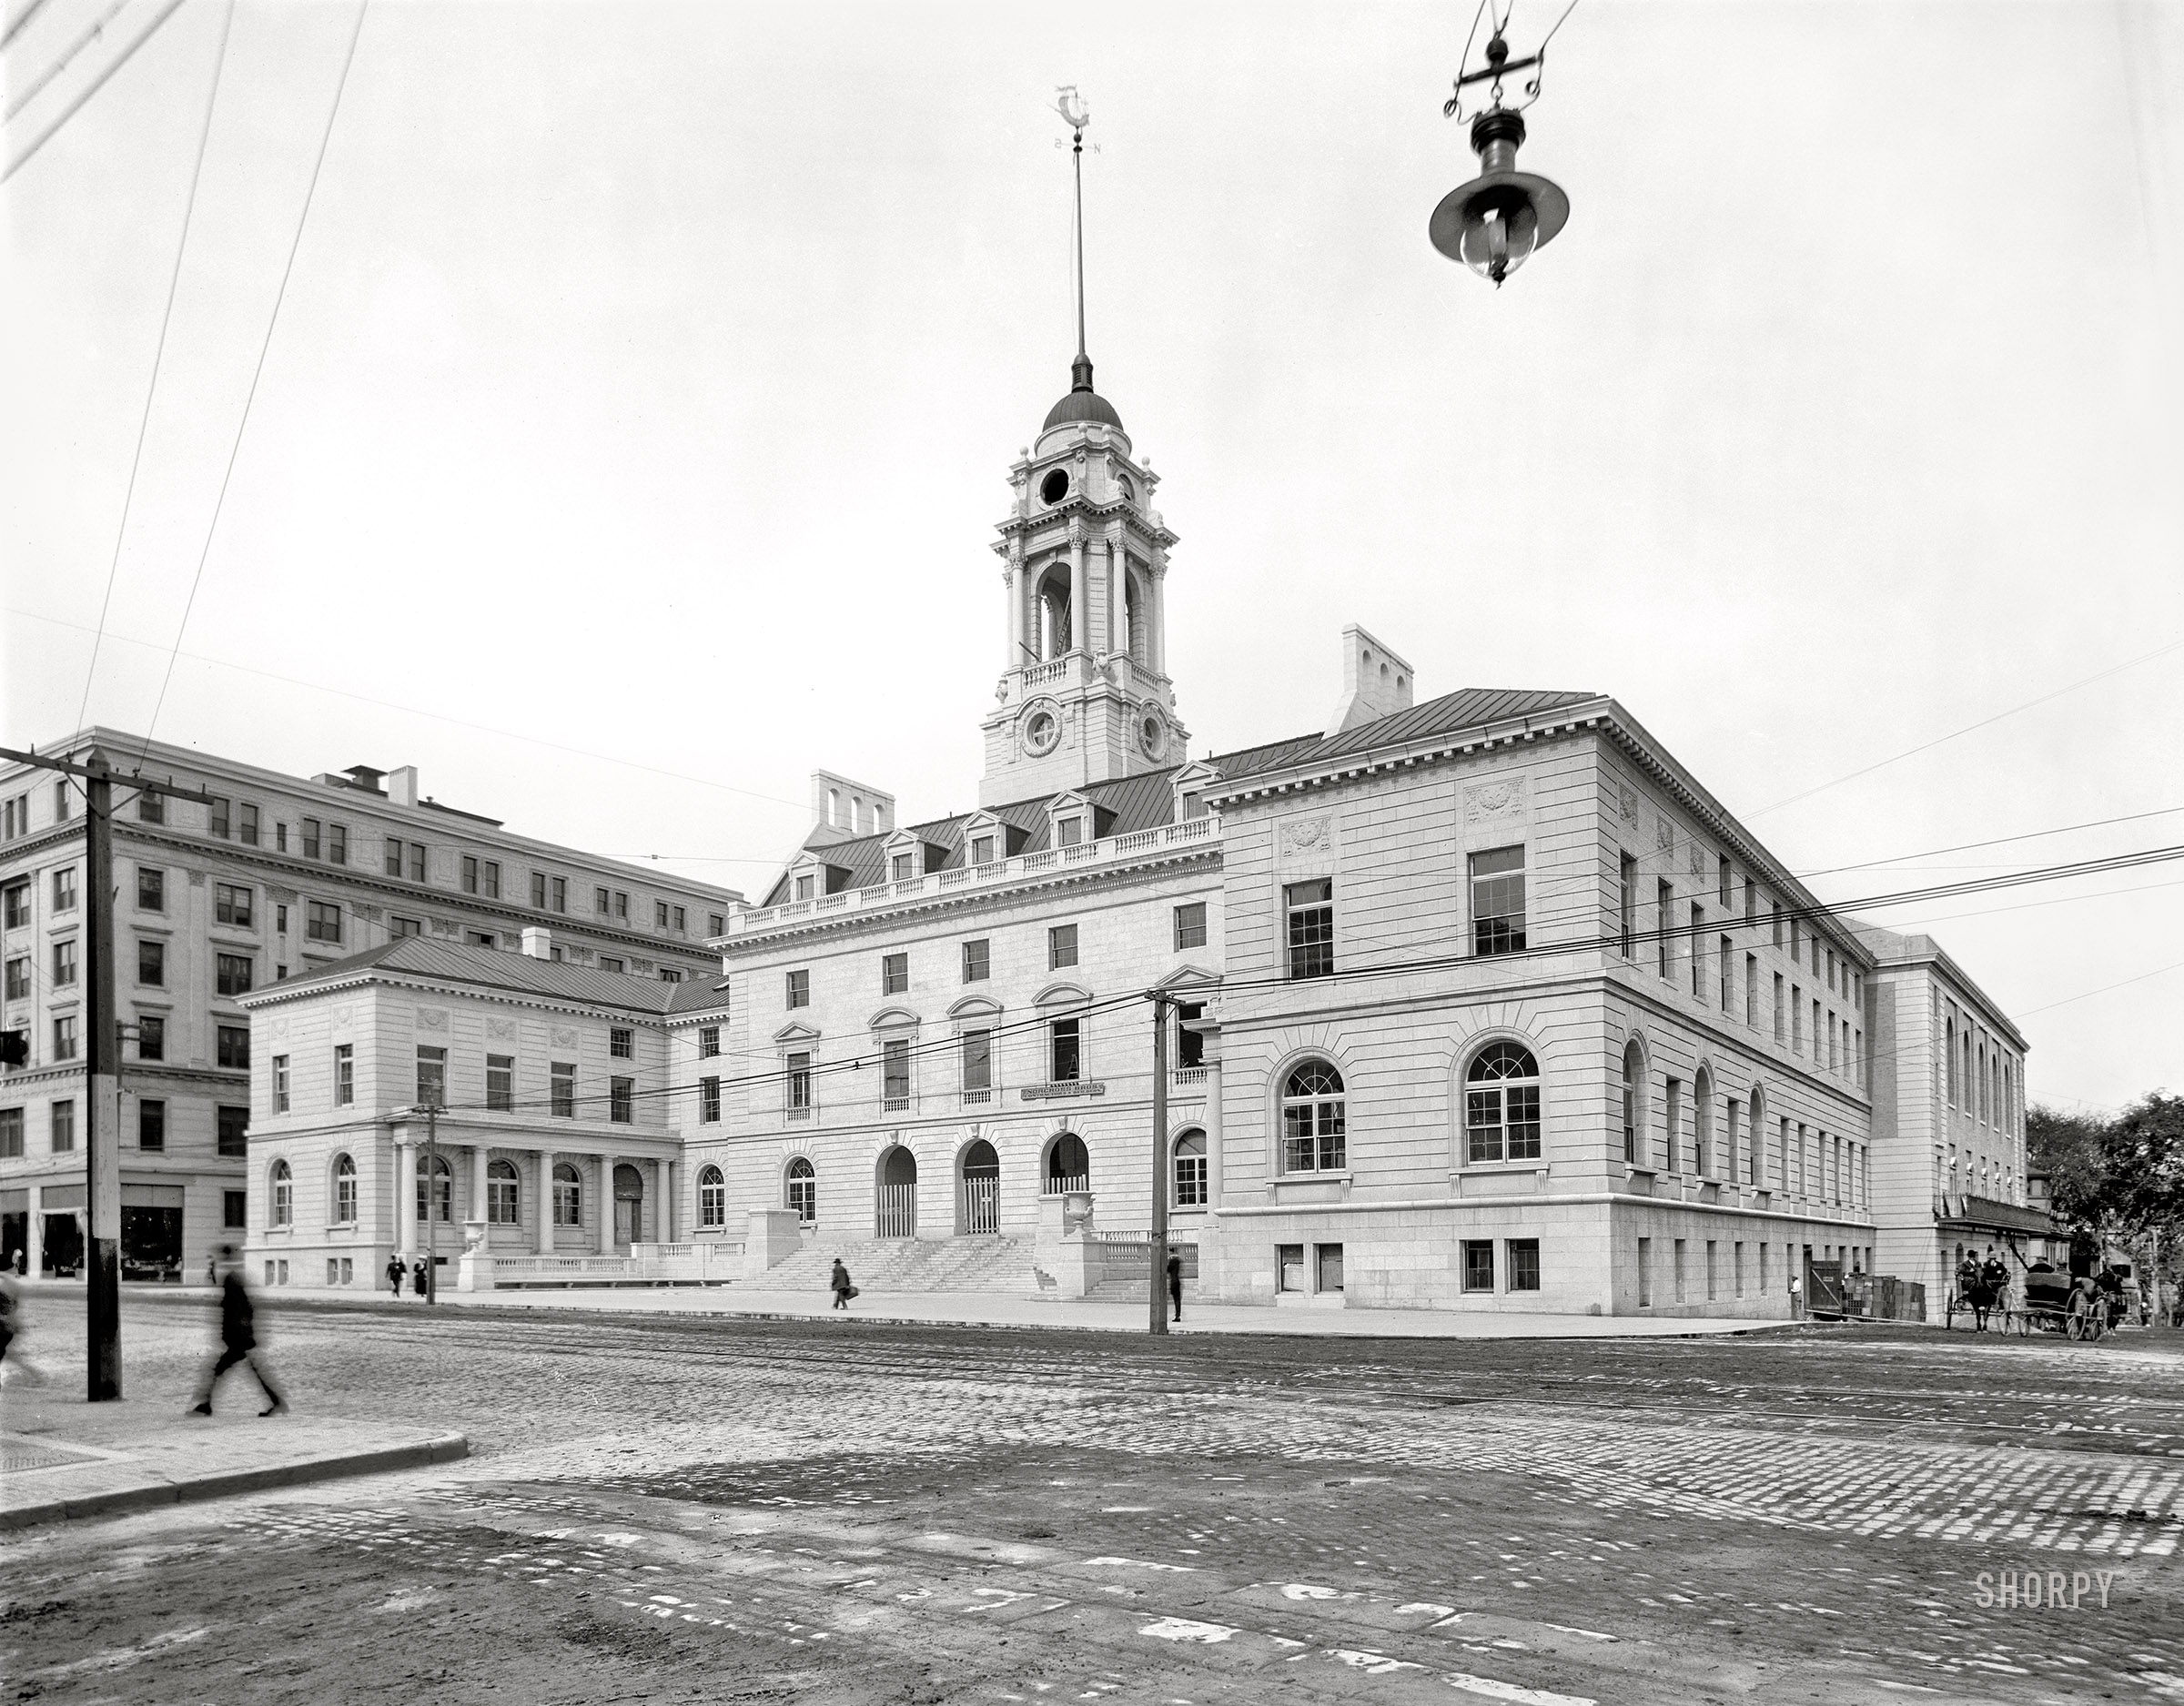 Portland, Maine, circa 1911. "New City Hall, Congress Street." Photobomb by our old friend the carbon arc lamp. 8x10 inch glass negative, Detroit Publishing Company. View full size.